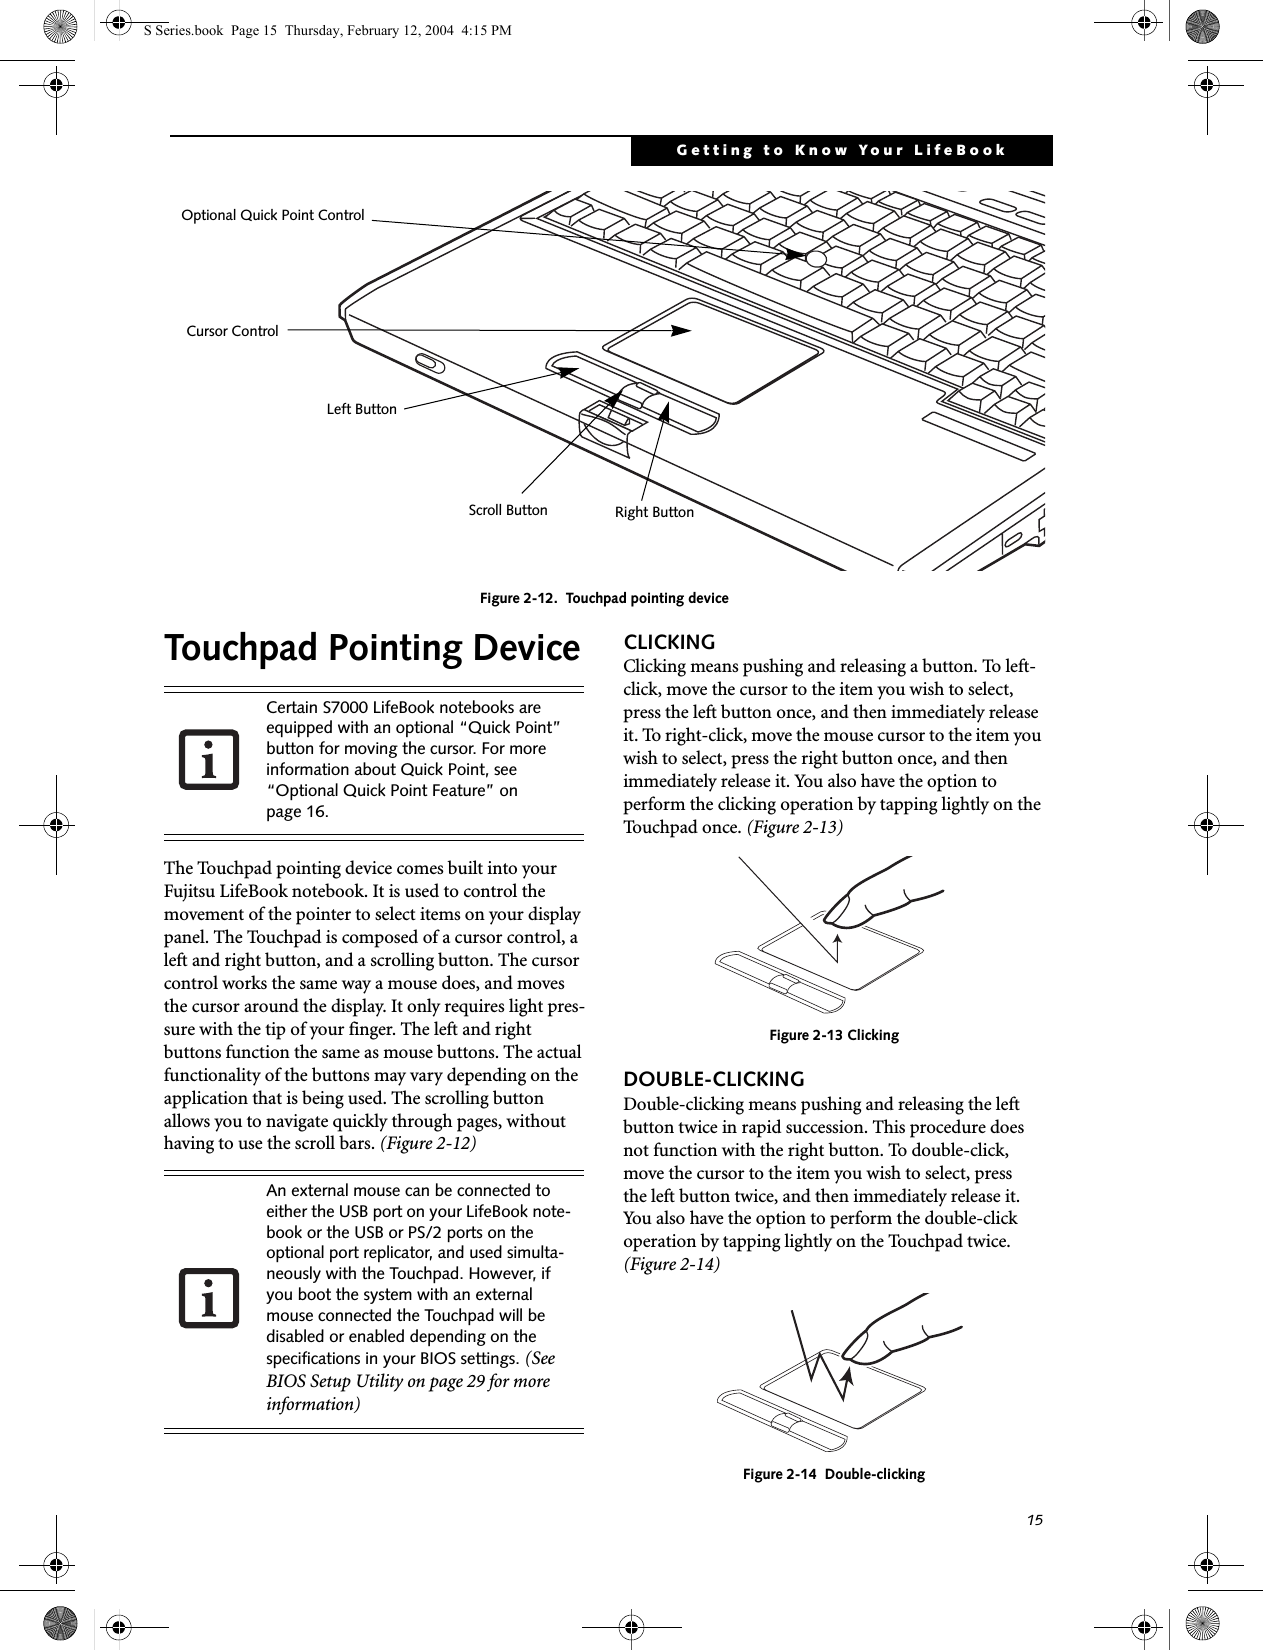 15Getting to Know Your LifeBookFigure 2-12.  Touchpad pointing deviceTouchpad Pointing DeviceThe Touchpad pointing device comes built into your Fujitsu LifeBook notebook. It is used to control the movement of the pointer to select items on your display panel. The Touchpad is composed of a cursor control, a left and right button, and a scrolling button. The cursor control works the same way a mouse does, and moves the cursor around the display. It only requires light pres-sure with the tip of your finger. The left and right buttons function the same as mouse buttons. The actual functionality of the buttons may vary depending on the application that is being used. The scrolling button allows you to navigate quickly through pages, without having to use the scroll bars. (Figure 2-12)CLICKINGClicking means pushing and releasing a button. To left-click, move the cursor to the item you wish to select, press the left button once, and then immediately release it. To right-click, move the mouse cursor to the item you wish to select, press the right button once, and then immediately release it. You also have the option to perform the clicking operation by tapping lightly on the Touchpad once. (Figure 2-13)Figure 2-13 ClickingDOUBLE-CLICKINGDouble-clicking means pushing and releasing the left button twice in rapid succession. This procedure does not function with the right button. To double-click, move the cursor to the item you wish to select, pressthe left button twice, and then immediately release it. You also have the option to perform the double-click operation by tapping lightly on the Touchpad twice. (Figure 2-14)Figure 2-14  Double-clickingCursor ControlLeft ButtonRight ButtonScroll ButtonOptional Quick Point ControlCertain S7000 LifeBook notebooks are equipped with an optional “Quick Point” button for moving the cursor. For more information about Quick Point, see “Optional Quick Point Feature” on page 16.An external mouse can be connected to either the USB port on your LifeBook note-book or the USB or PS/2 ports on the optional port replicator, and used simulta-neously with the Touchpad. However, if you boot the system with an external mouse connected the Touchpad will be disabled or enabled depending on the specifications in your BIOS settings. (See BIOS Setup Utility on page 29 for more information)S Series.book  Page 15  Thursday, February 12, 2004  4:15 PM